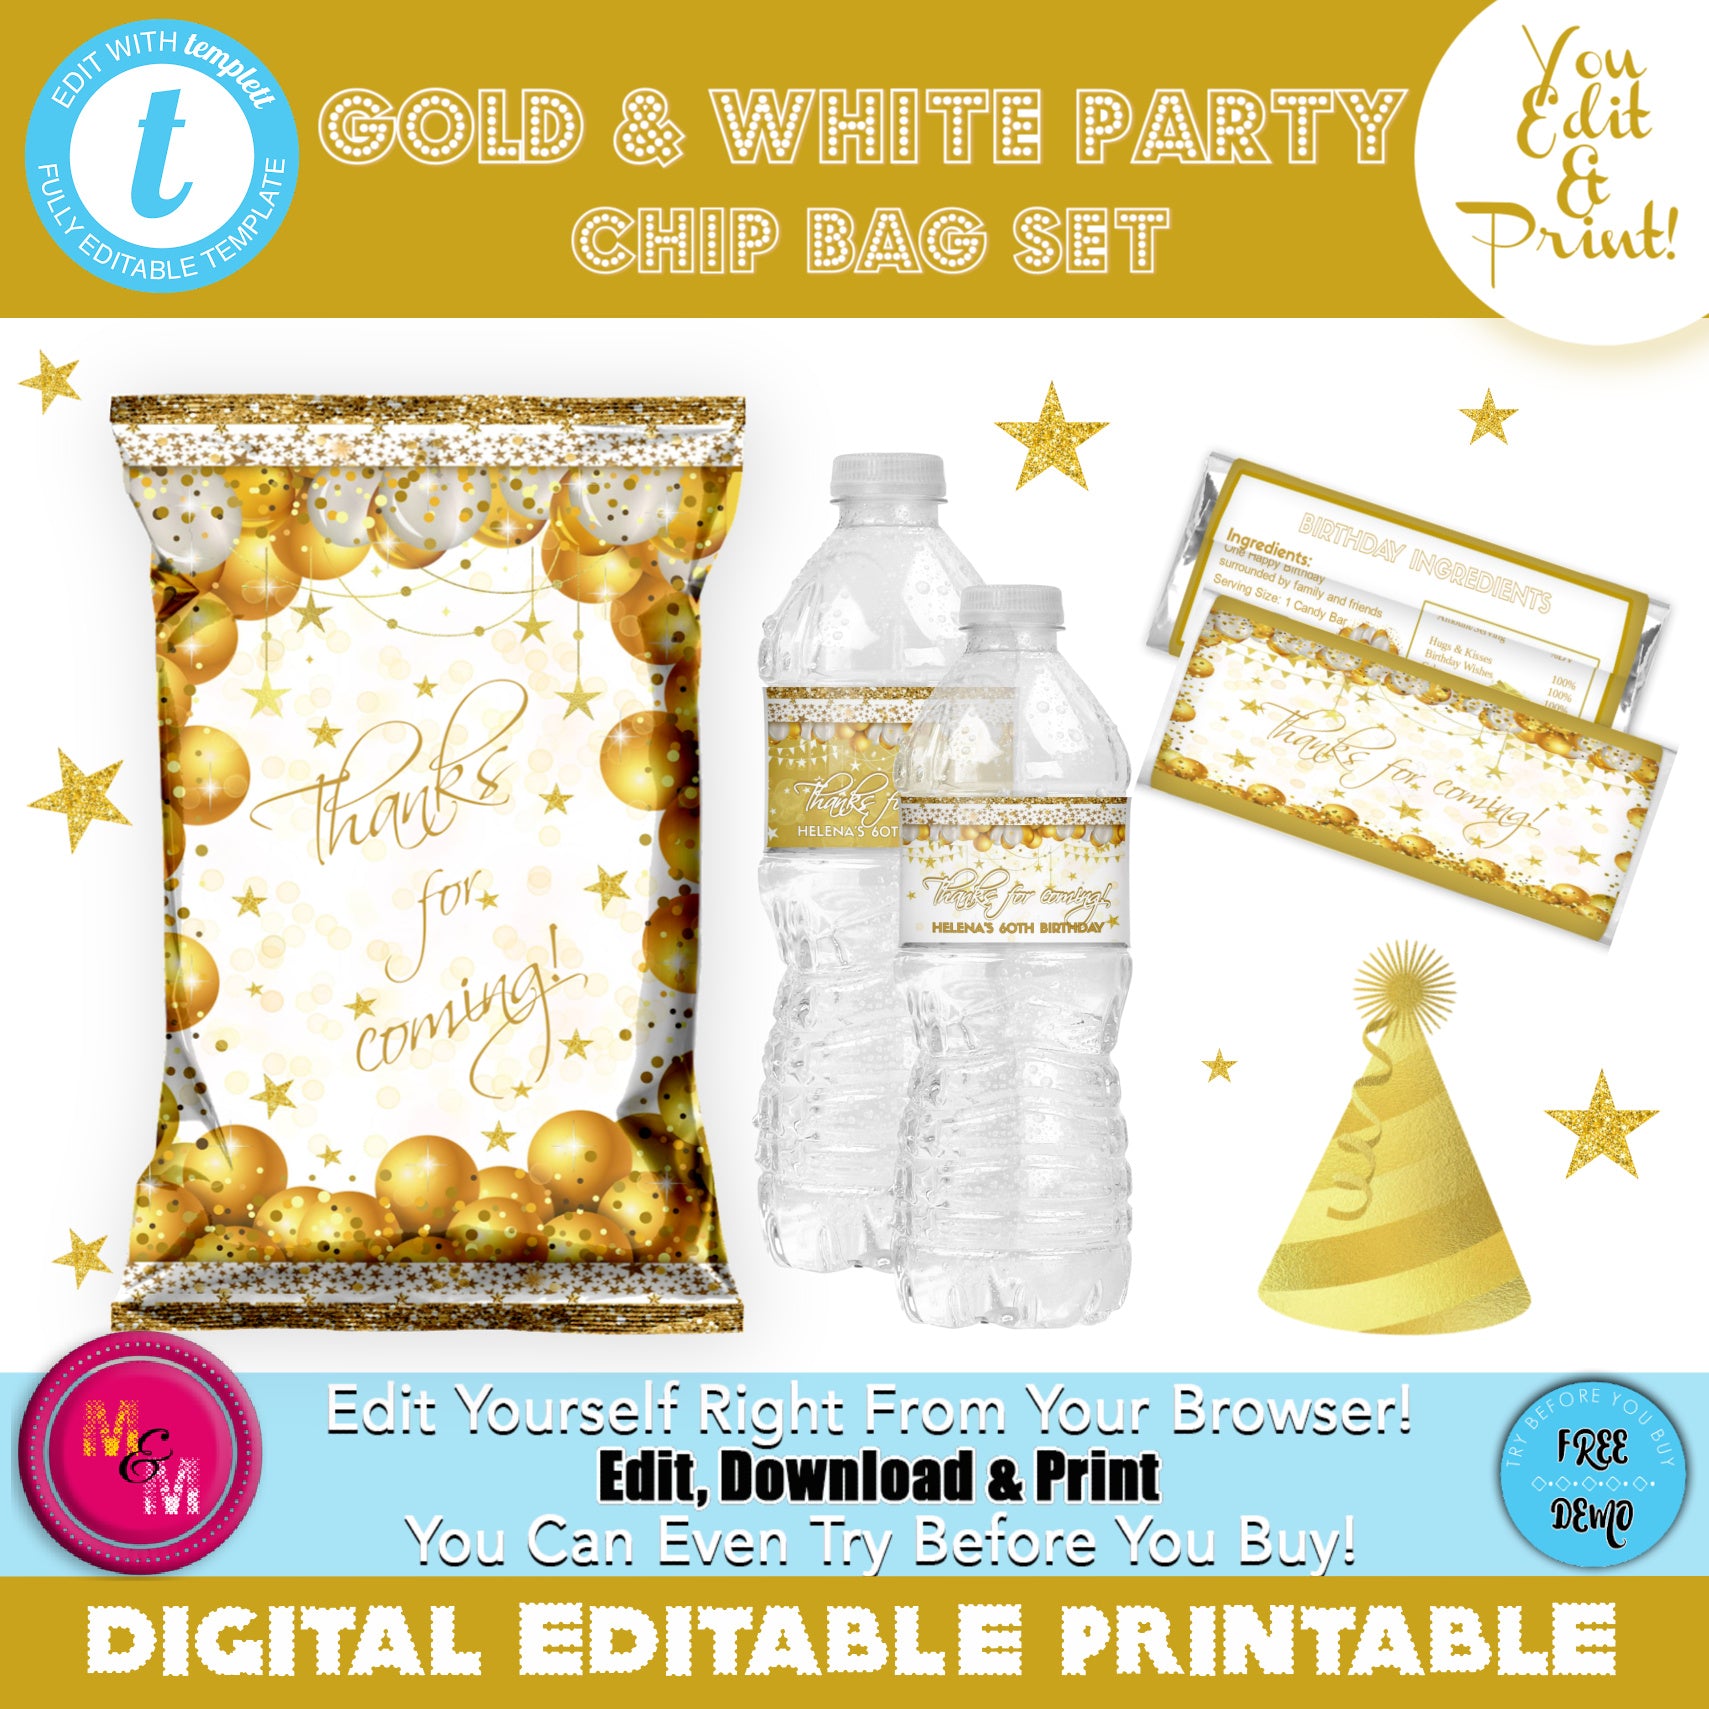 Editable White & Gold Chip Bag & Candy Bar Wrappers Set, White & Gold Party Favors, White & Gold Decorations